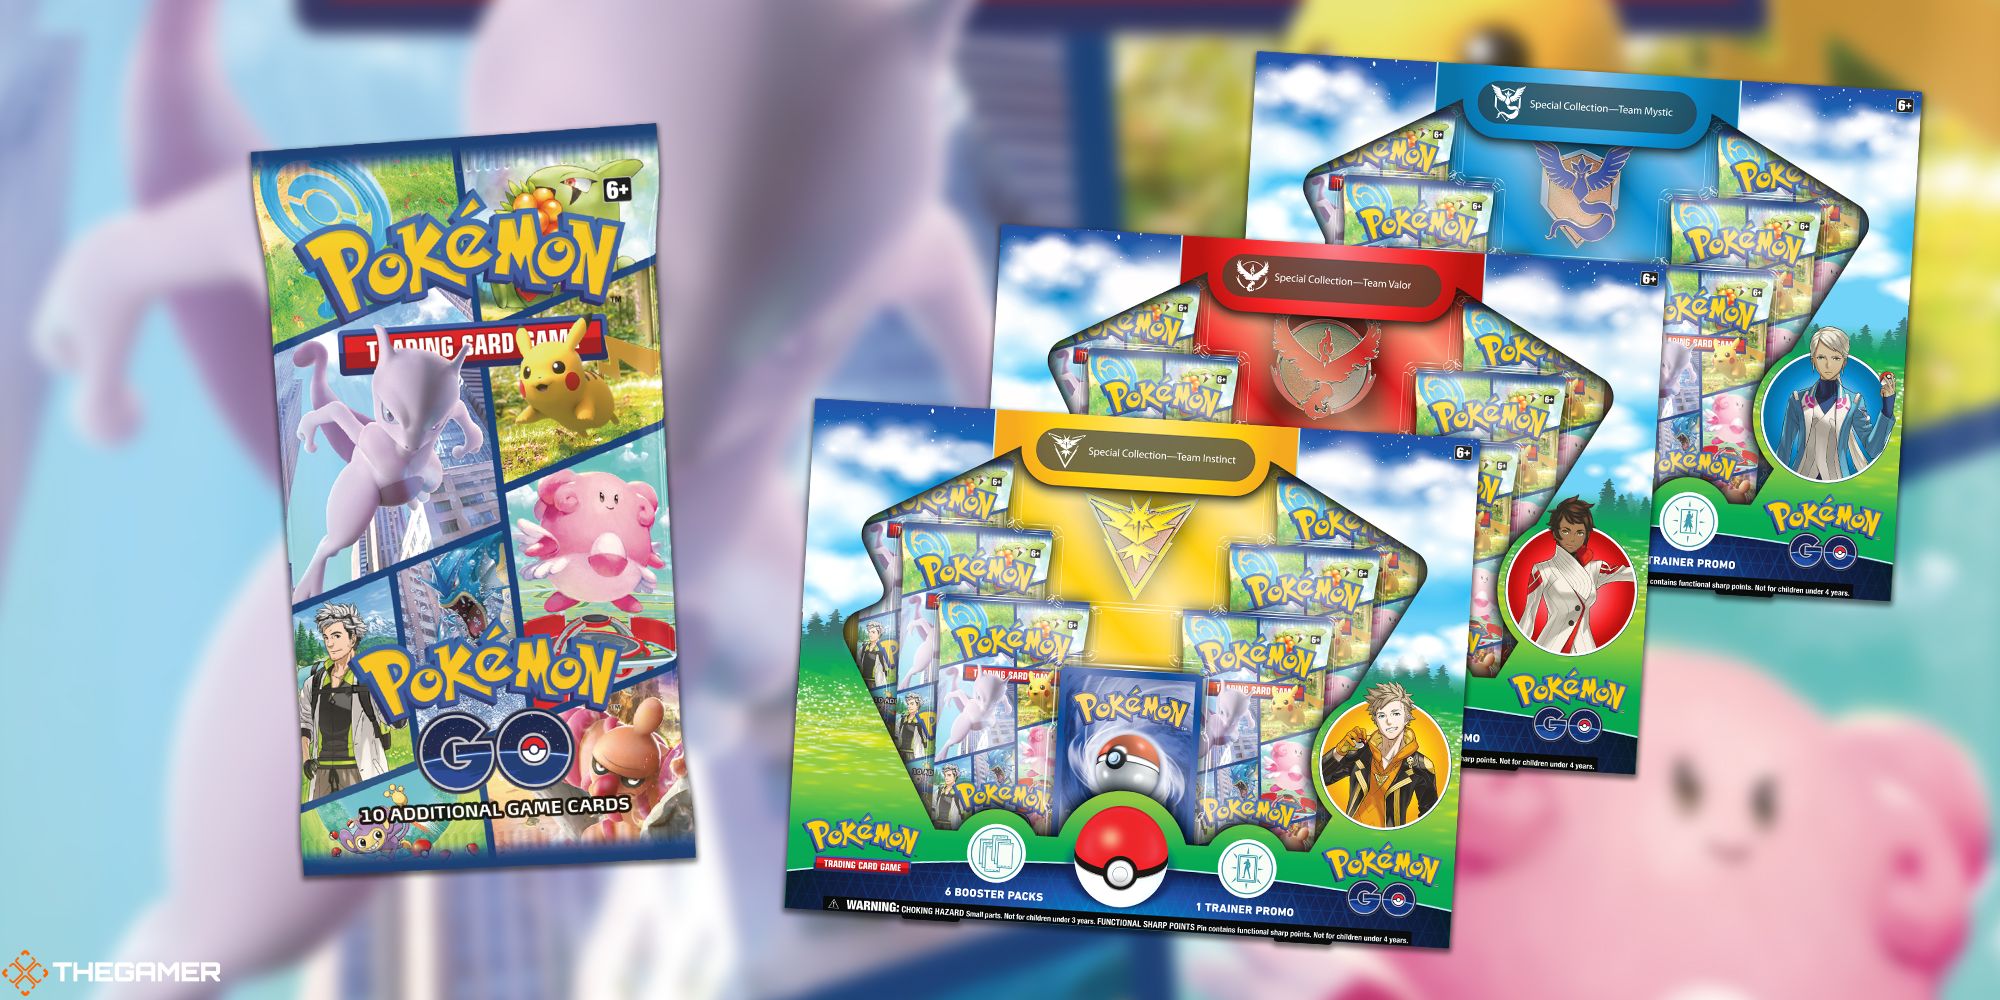 The Pokemon TCG Reveals Products And Release Date For Its Pokemon Go Expansion